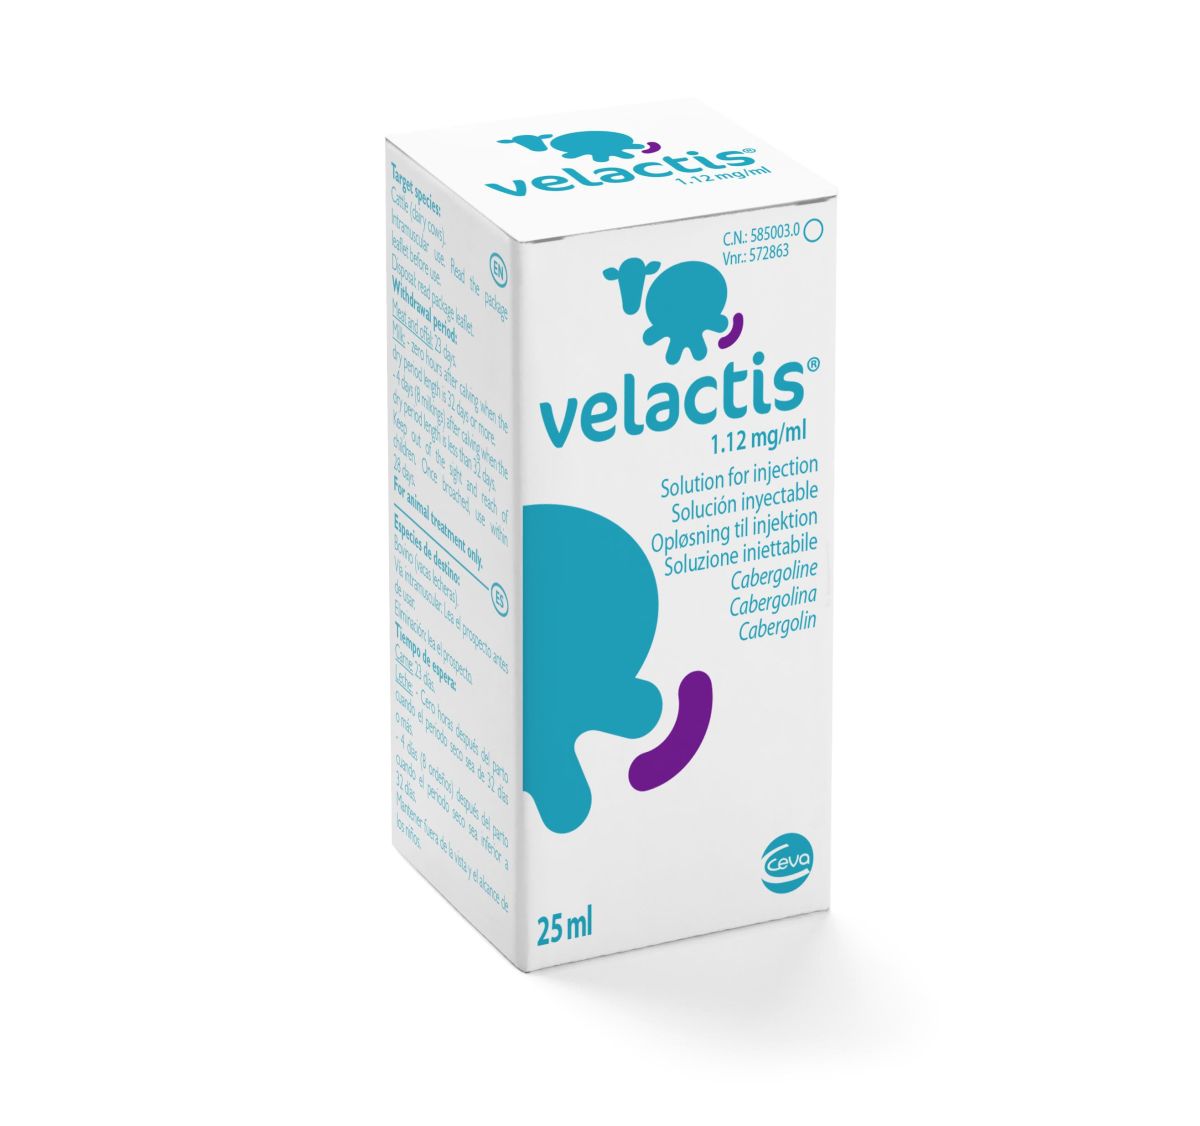 Dairy farmers urged against the use of Velactis